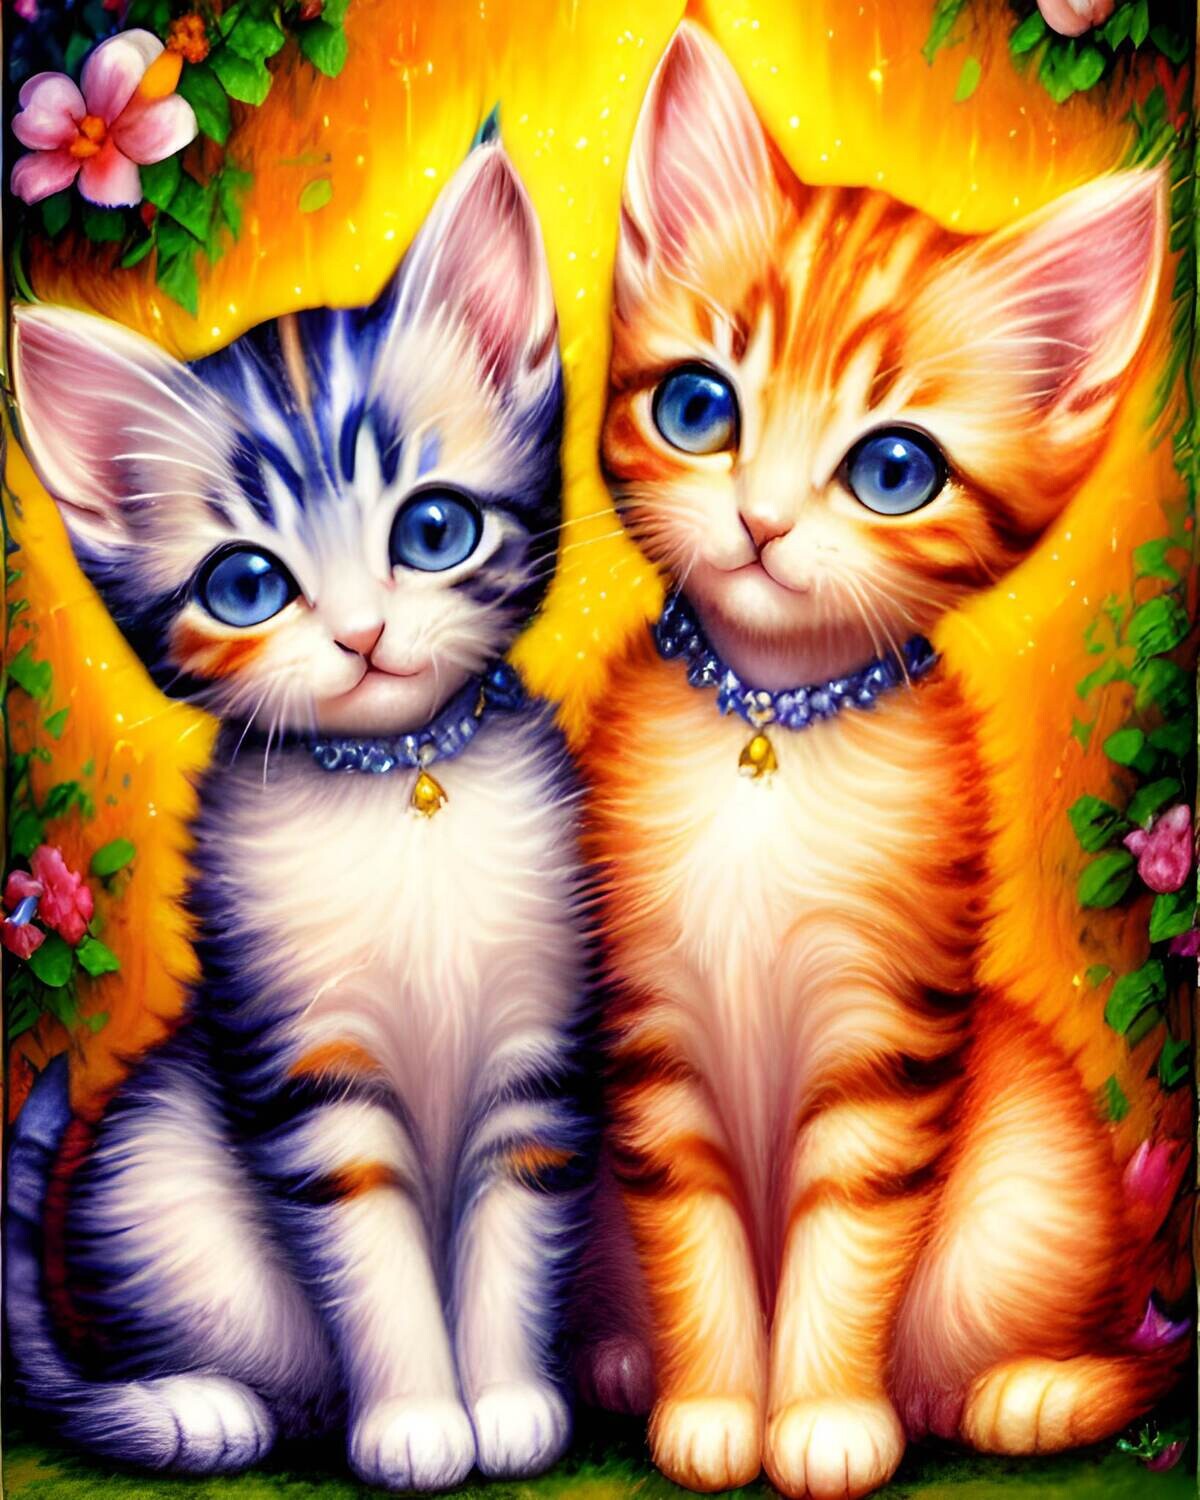 Pair of Kittens - 30 x 40cm Full Drill (Round) with AB drills - POURED GLUE - Diamond Painting Kit